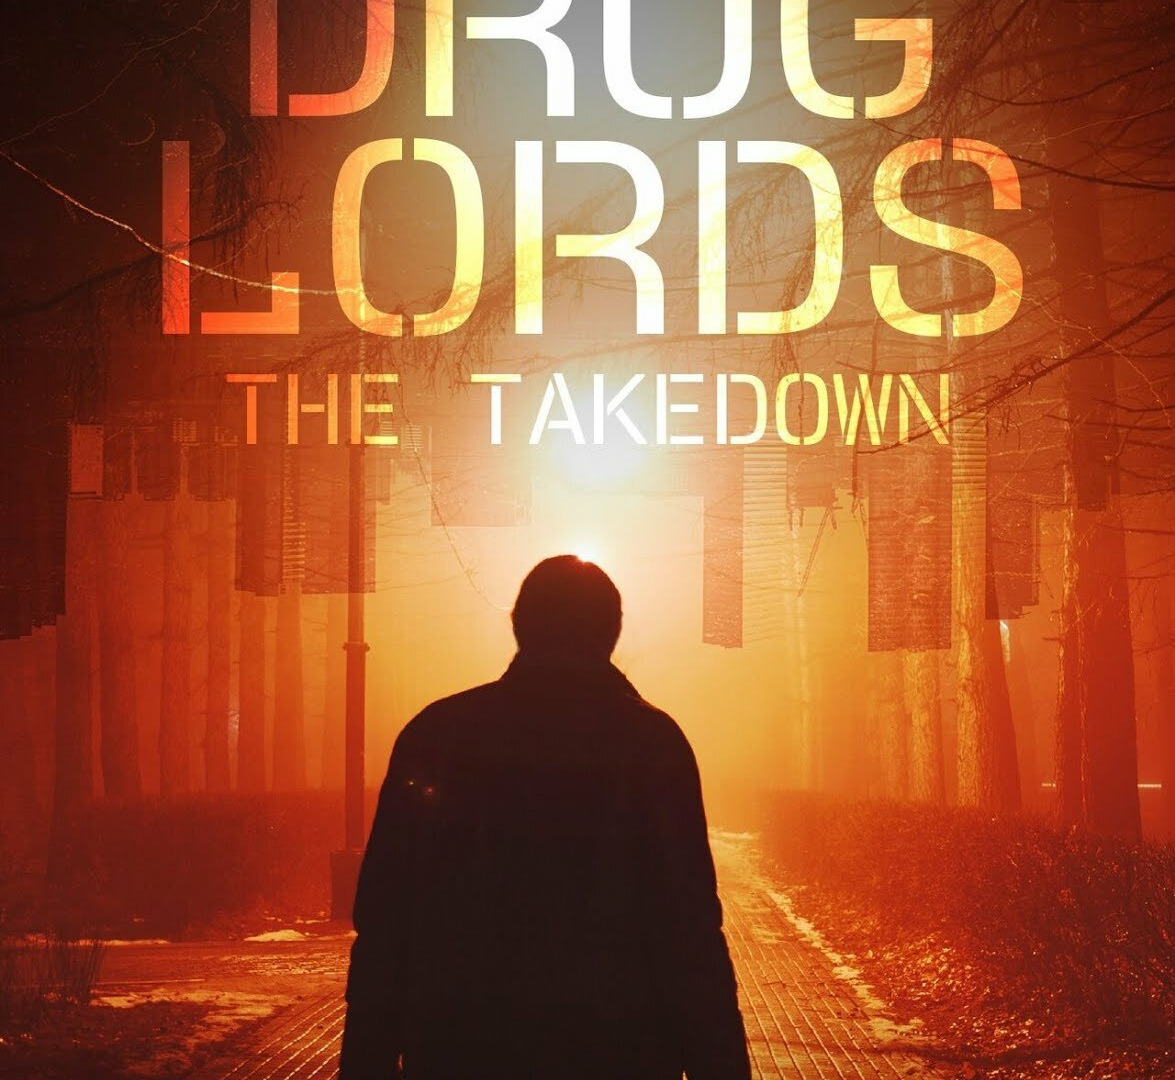 Show Drug Lords: The Takedown